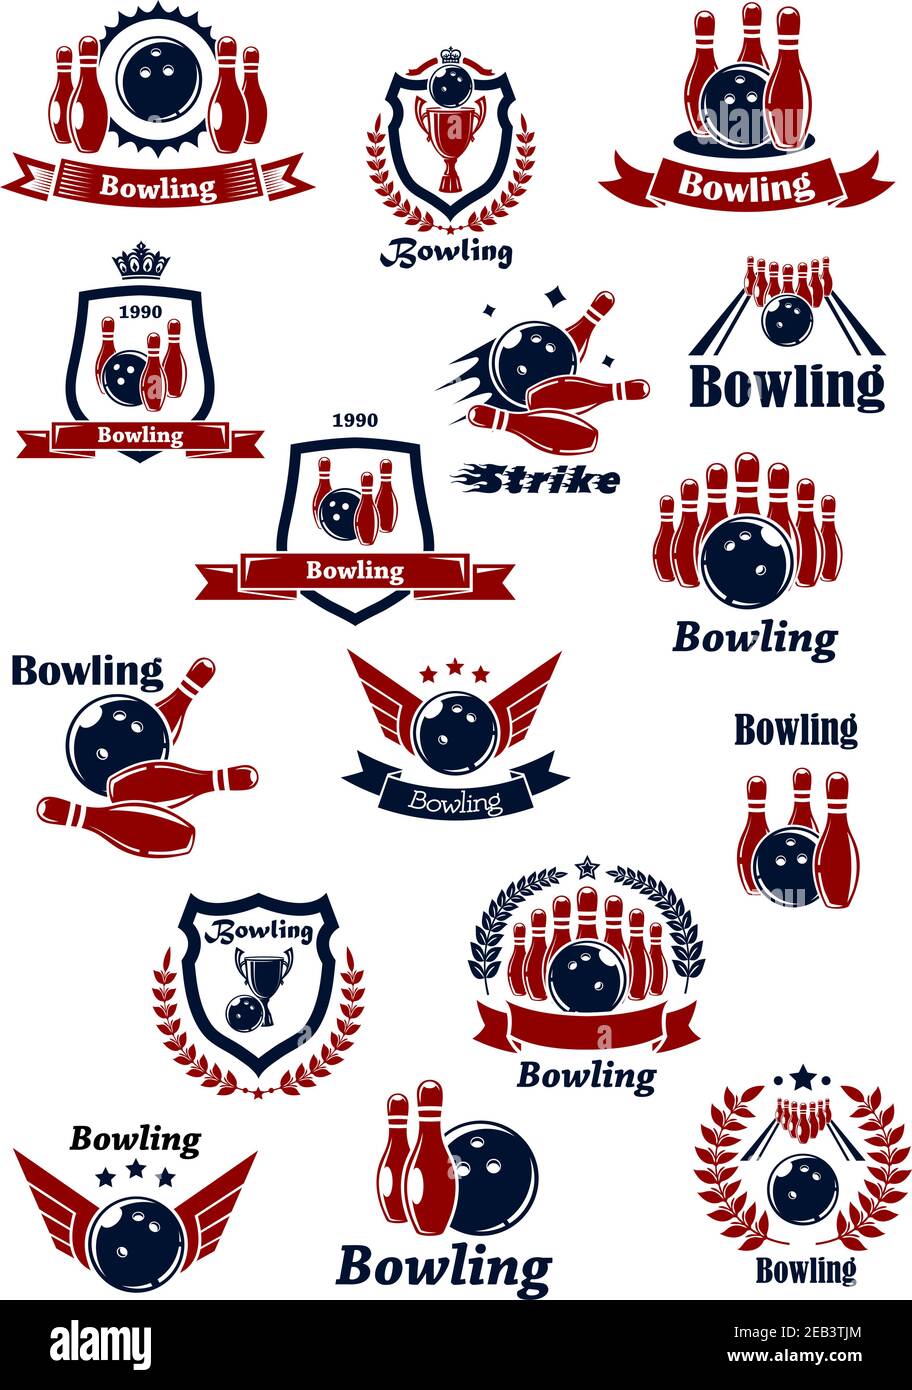 Bowling club or tournament icons and symbols design in red and blue colors with balls, ninepins, strikes and trophy cups on lanes. Adorned by wreaths, Stock Vector